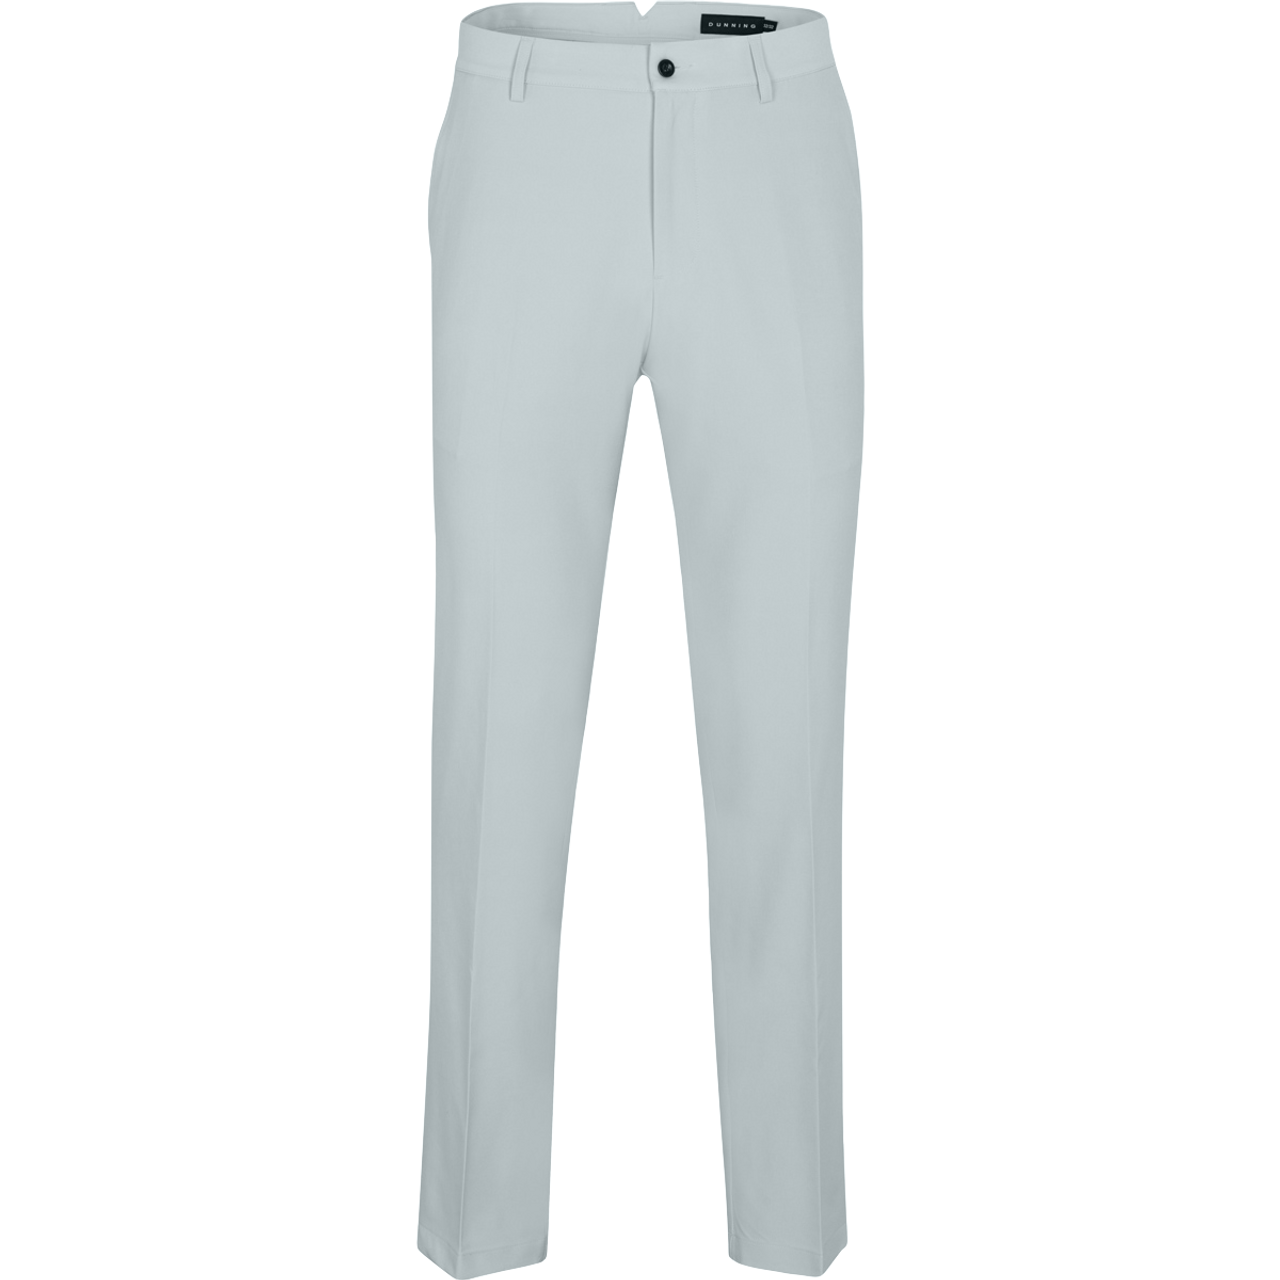 Player Fit Woven Pant: Plank - Dunning